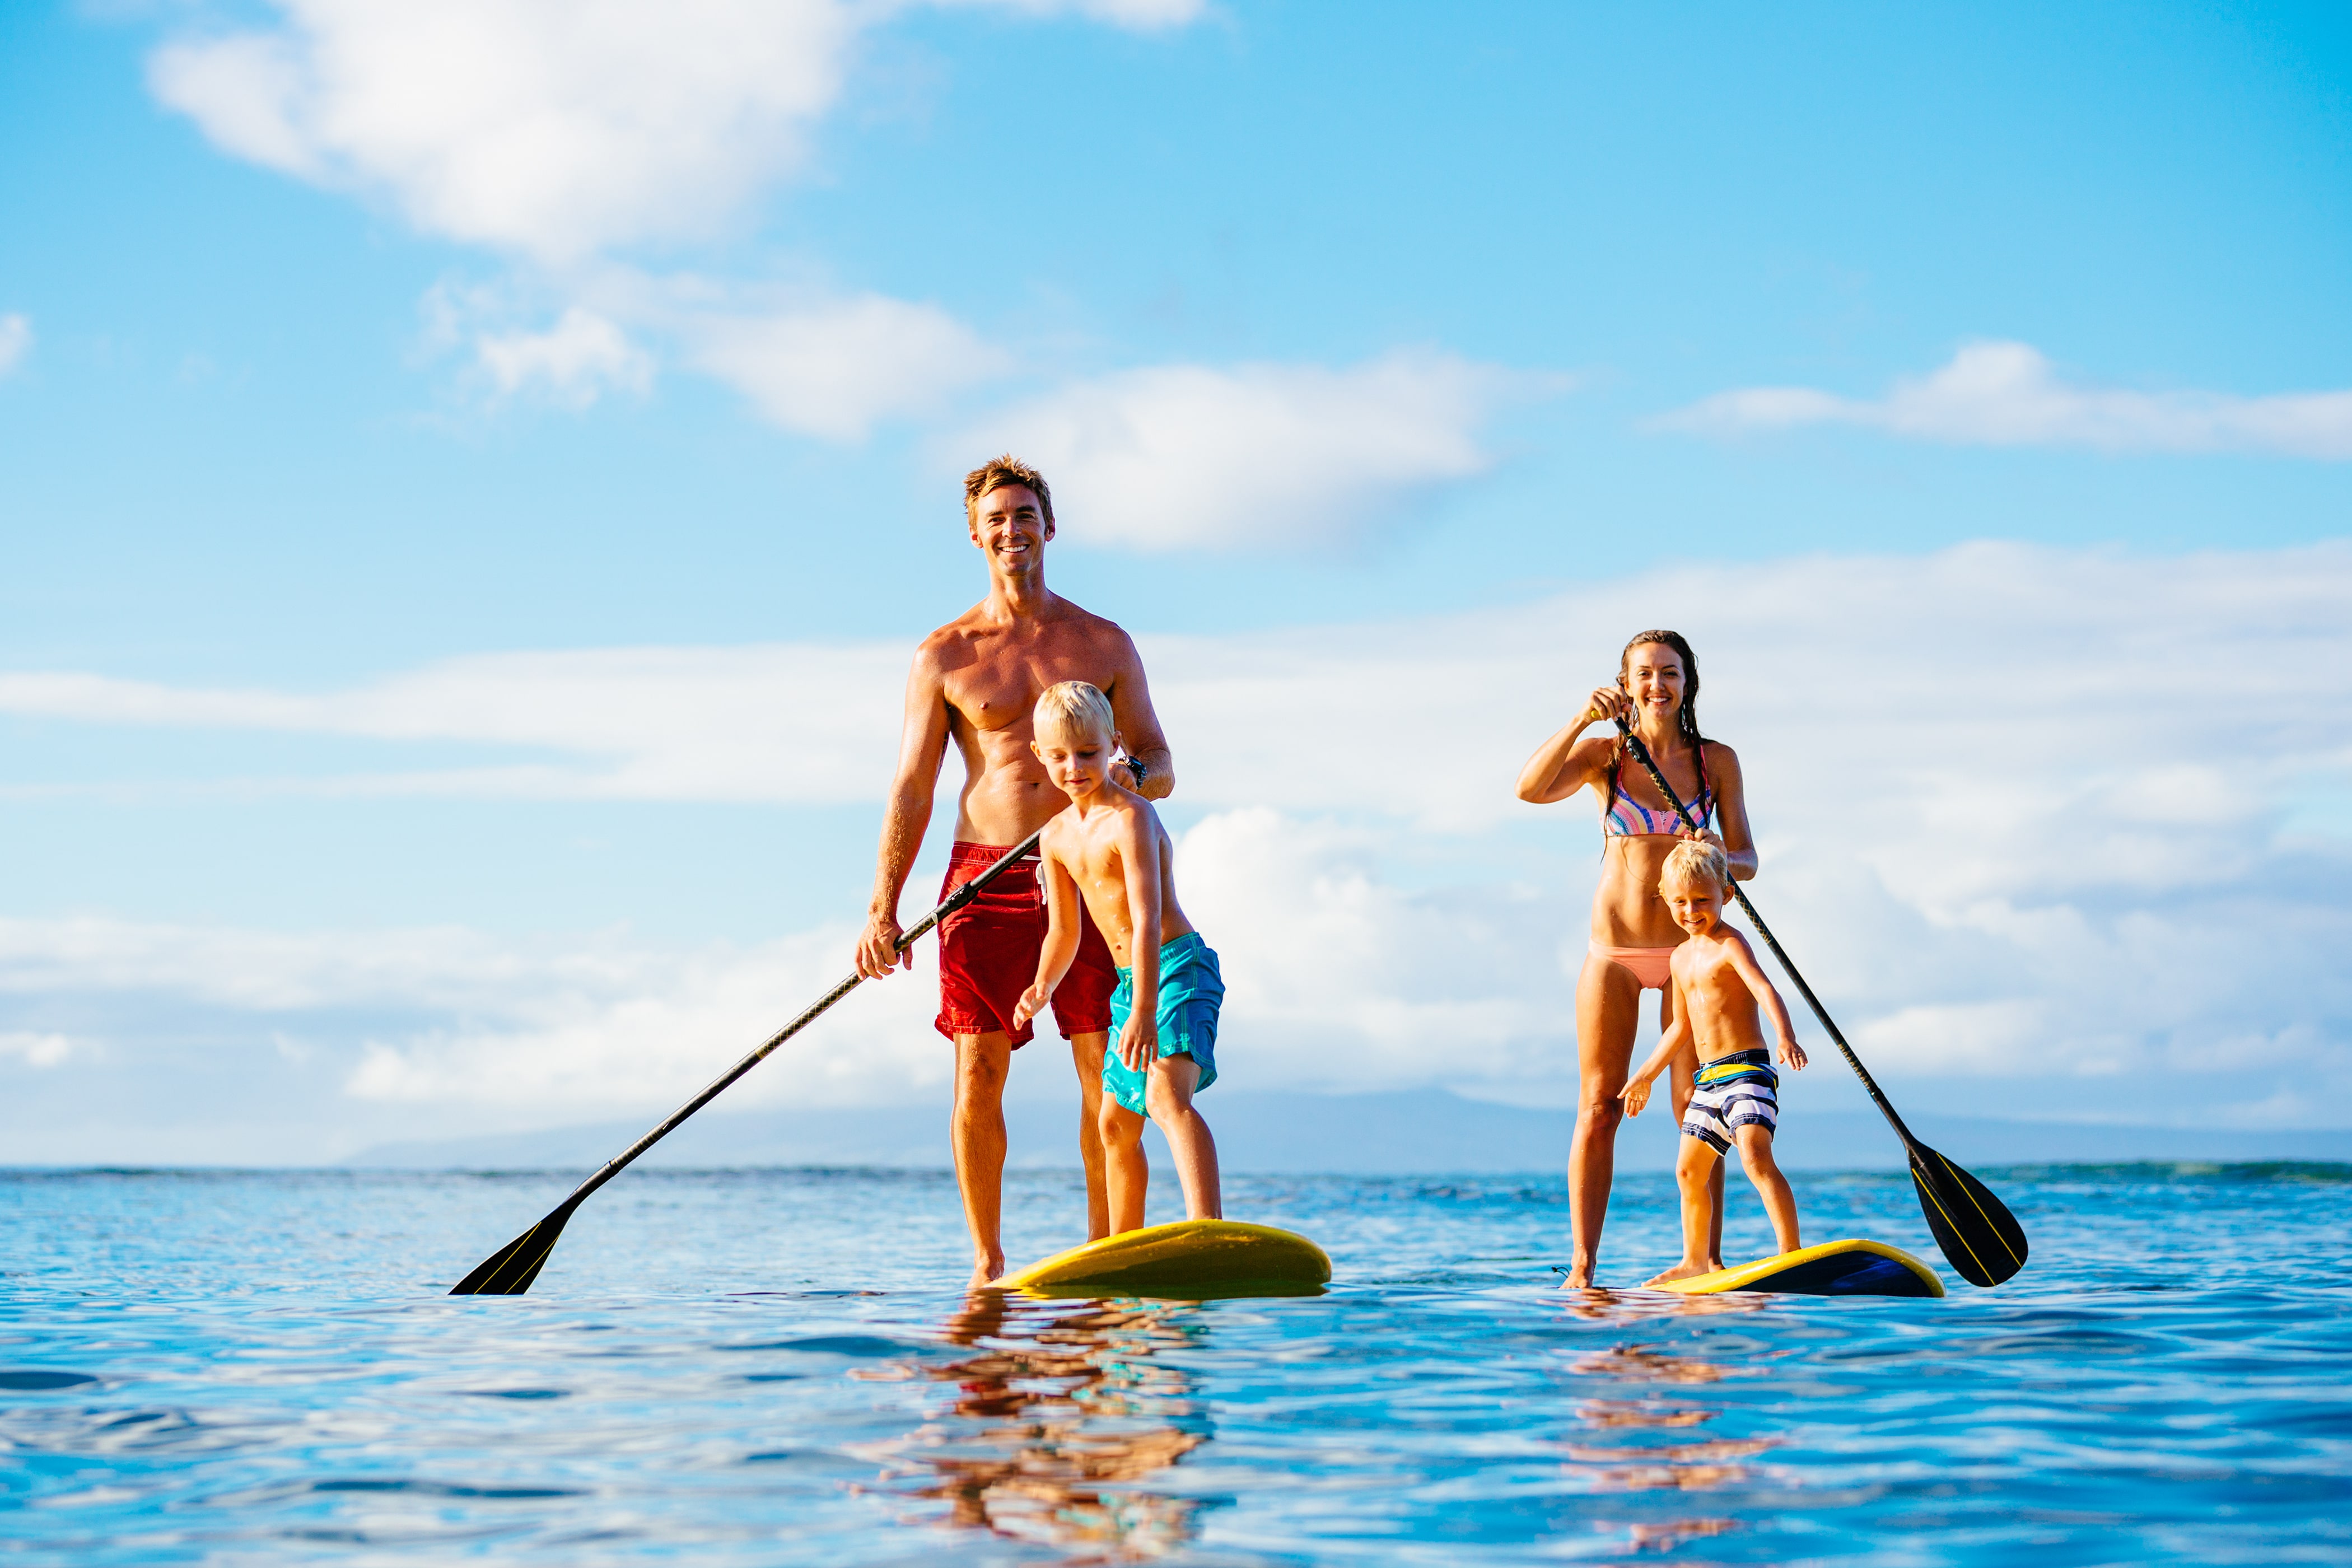 A family of four on paddle boards in the beautiful blue waters of the ocean. White fluffy clouds hang in the sky.